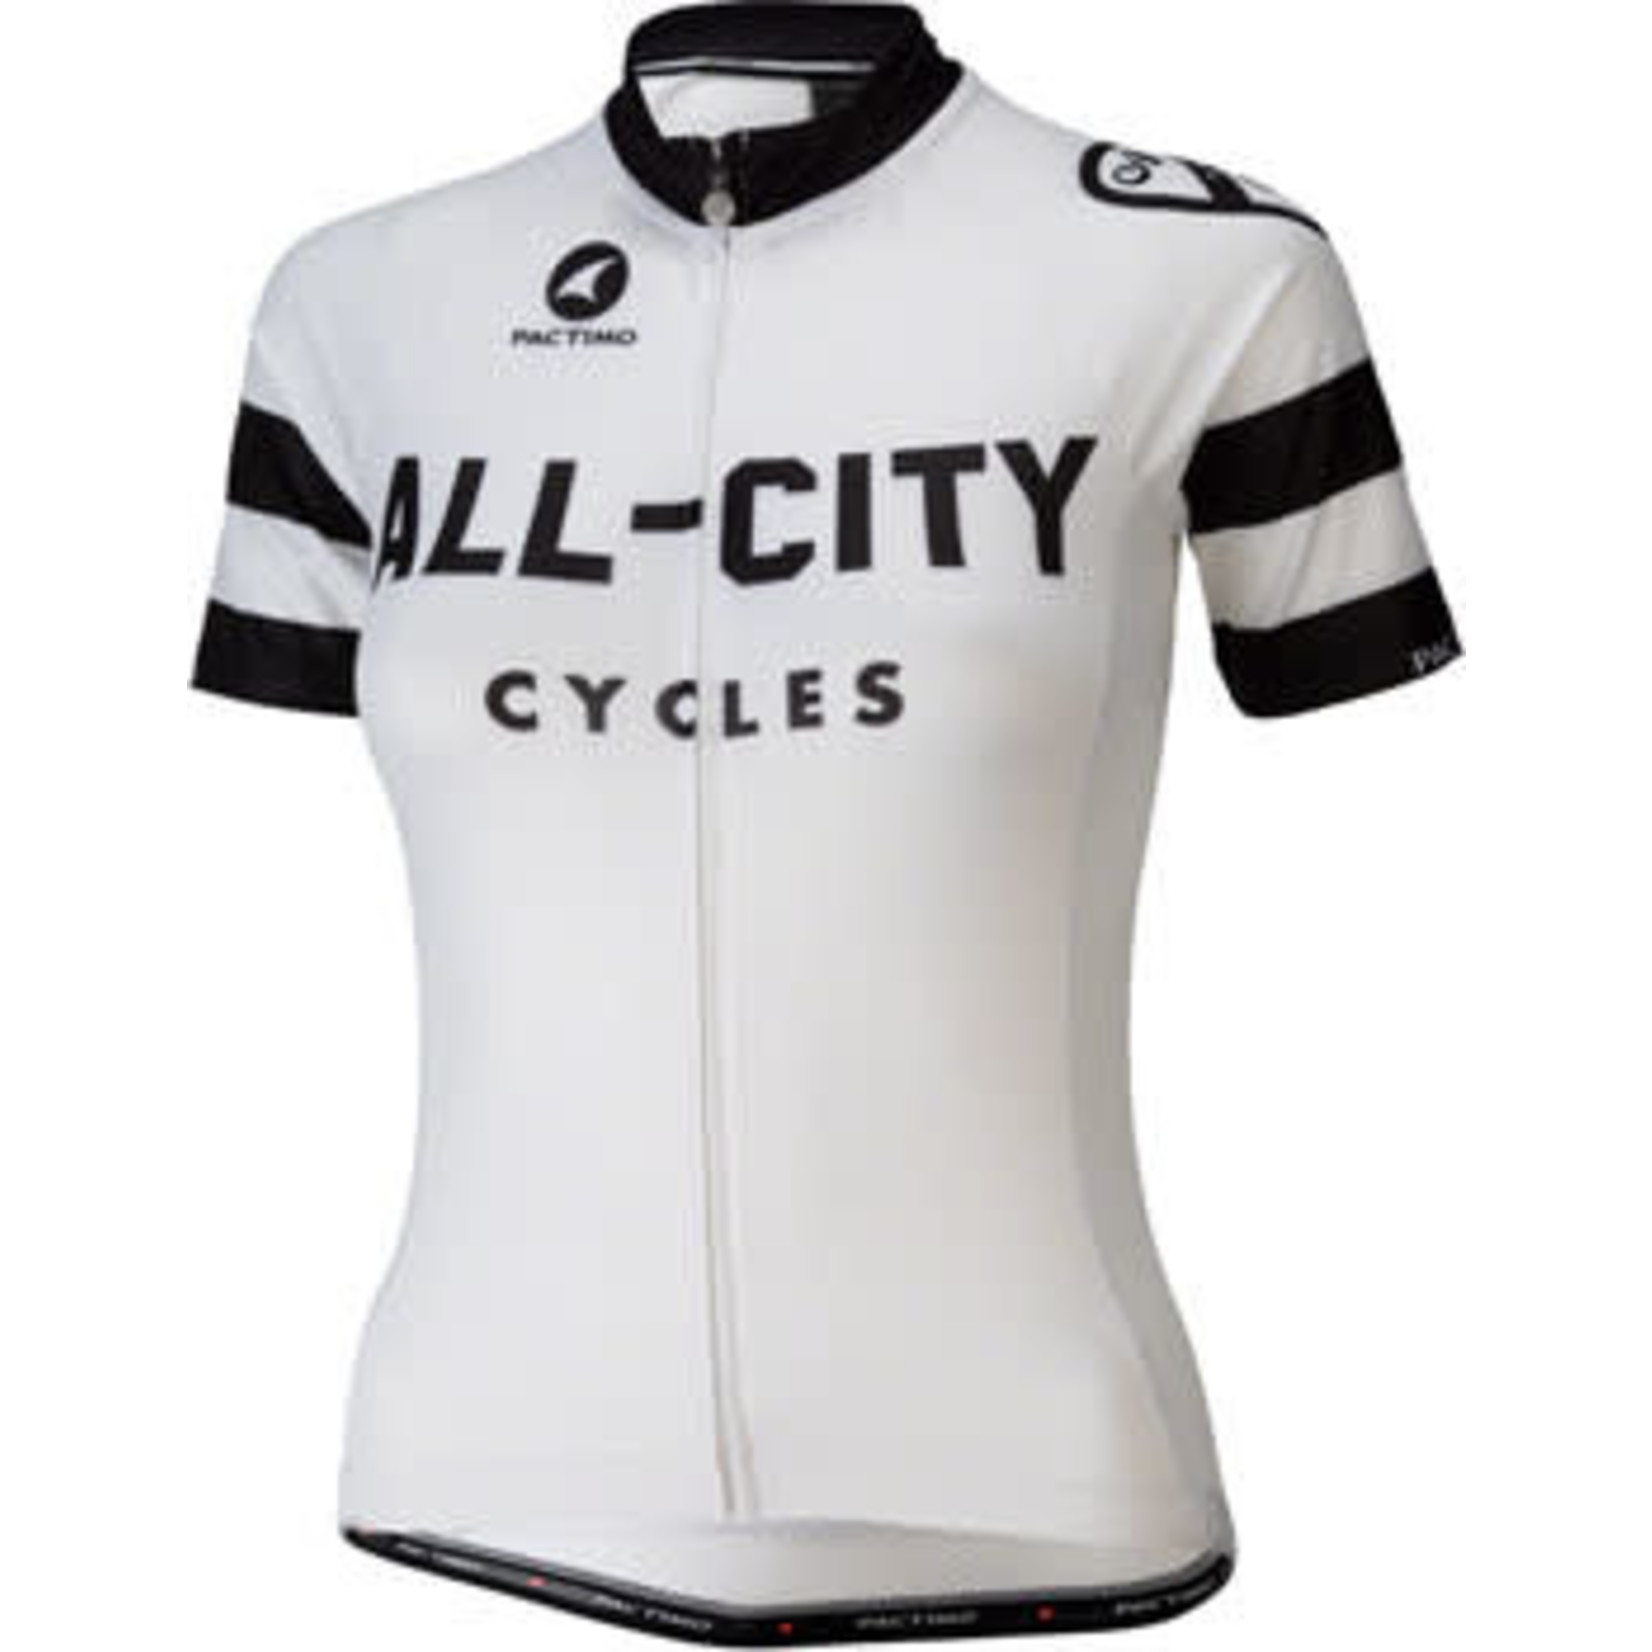 All-City All-City Classic Jersey - White/Black, Short Sleeve, Women's, Large